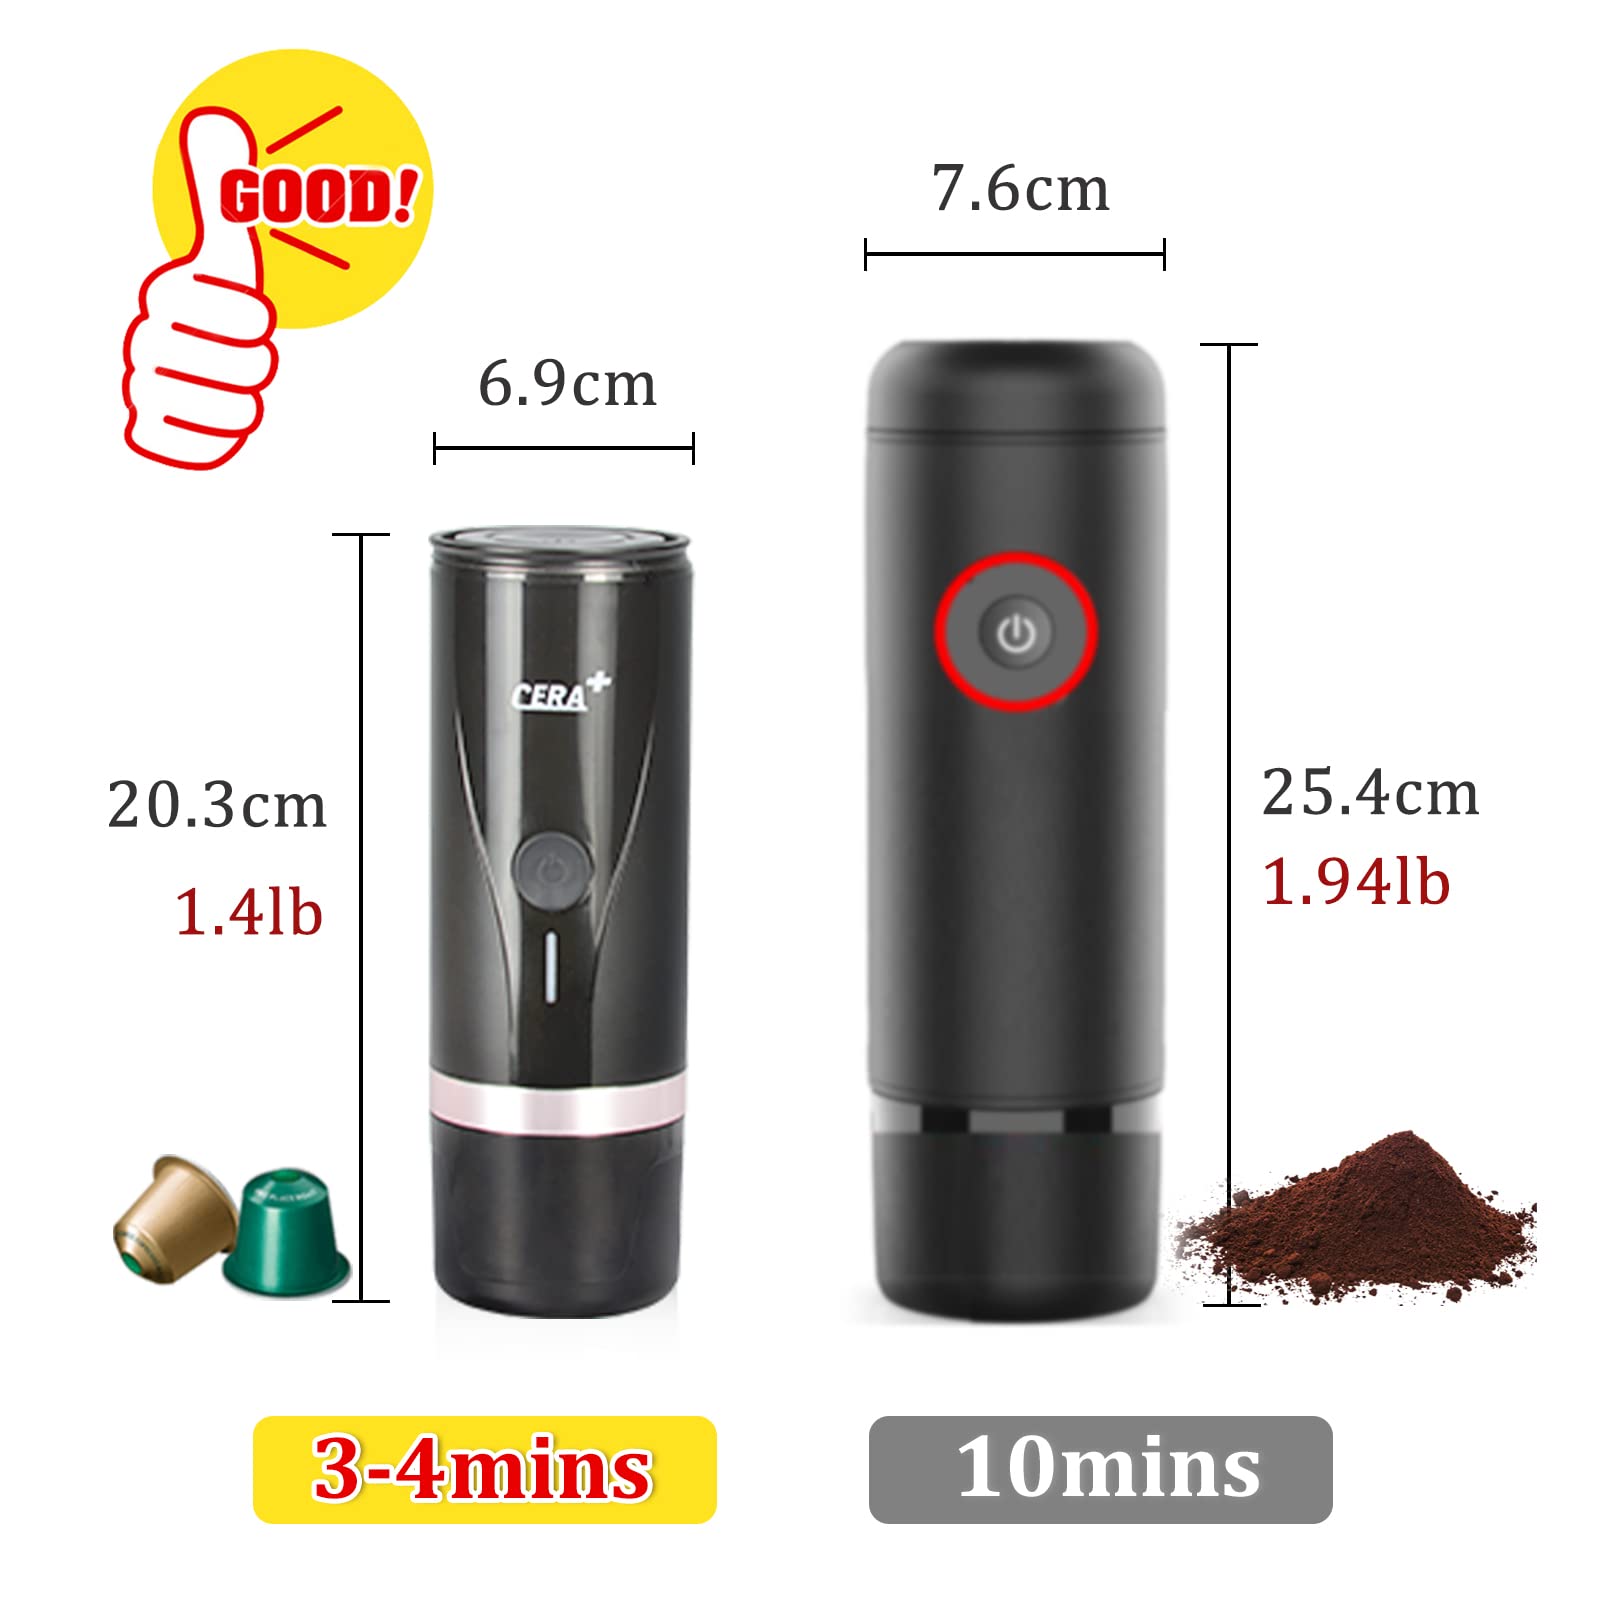 https://neso-pro.com/cdn/shop/products/PortableCoffeeMakerforTravel_3-4minsSelf-Heating20BarRechargeableMiniCampingEspressoMachine_CompatiblewithNSPods_GroundCoffeeforHome_Office_OutdoorCampaignwithCarryingCasebyNeso-Pro5.jpg?v=1659748981&width=1946